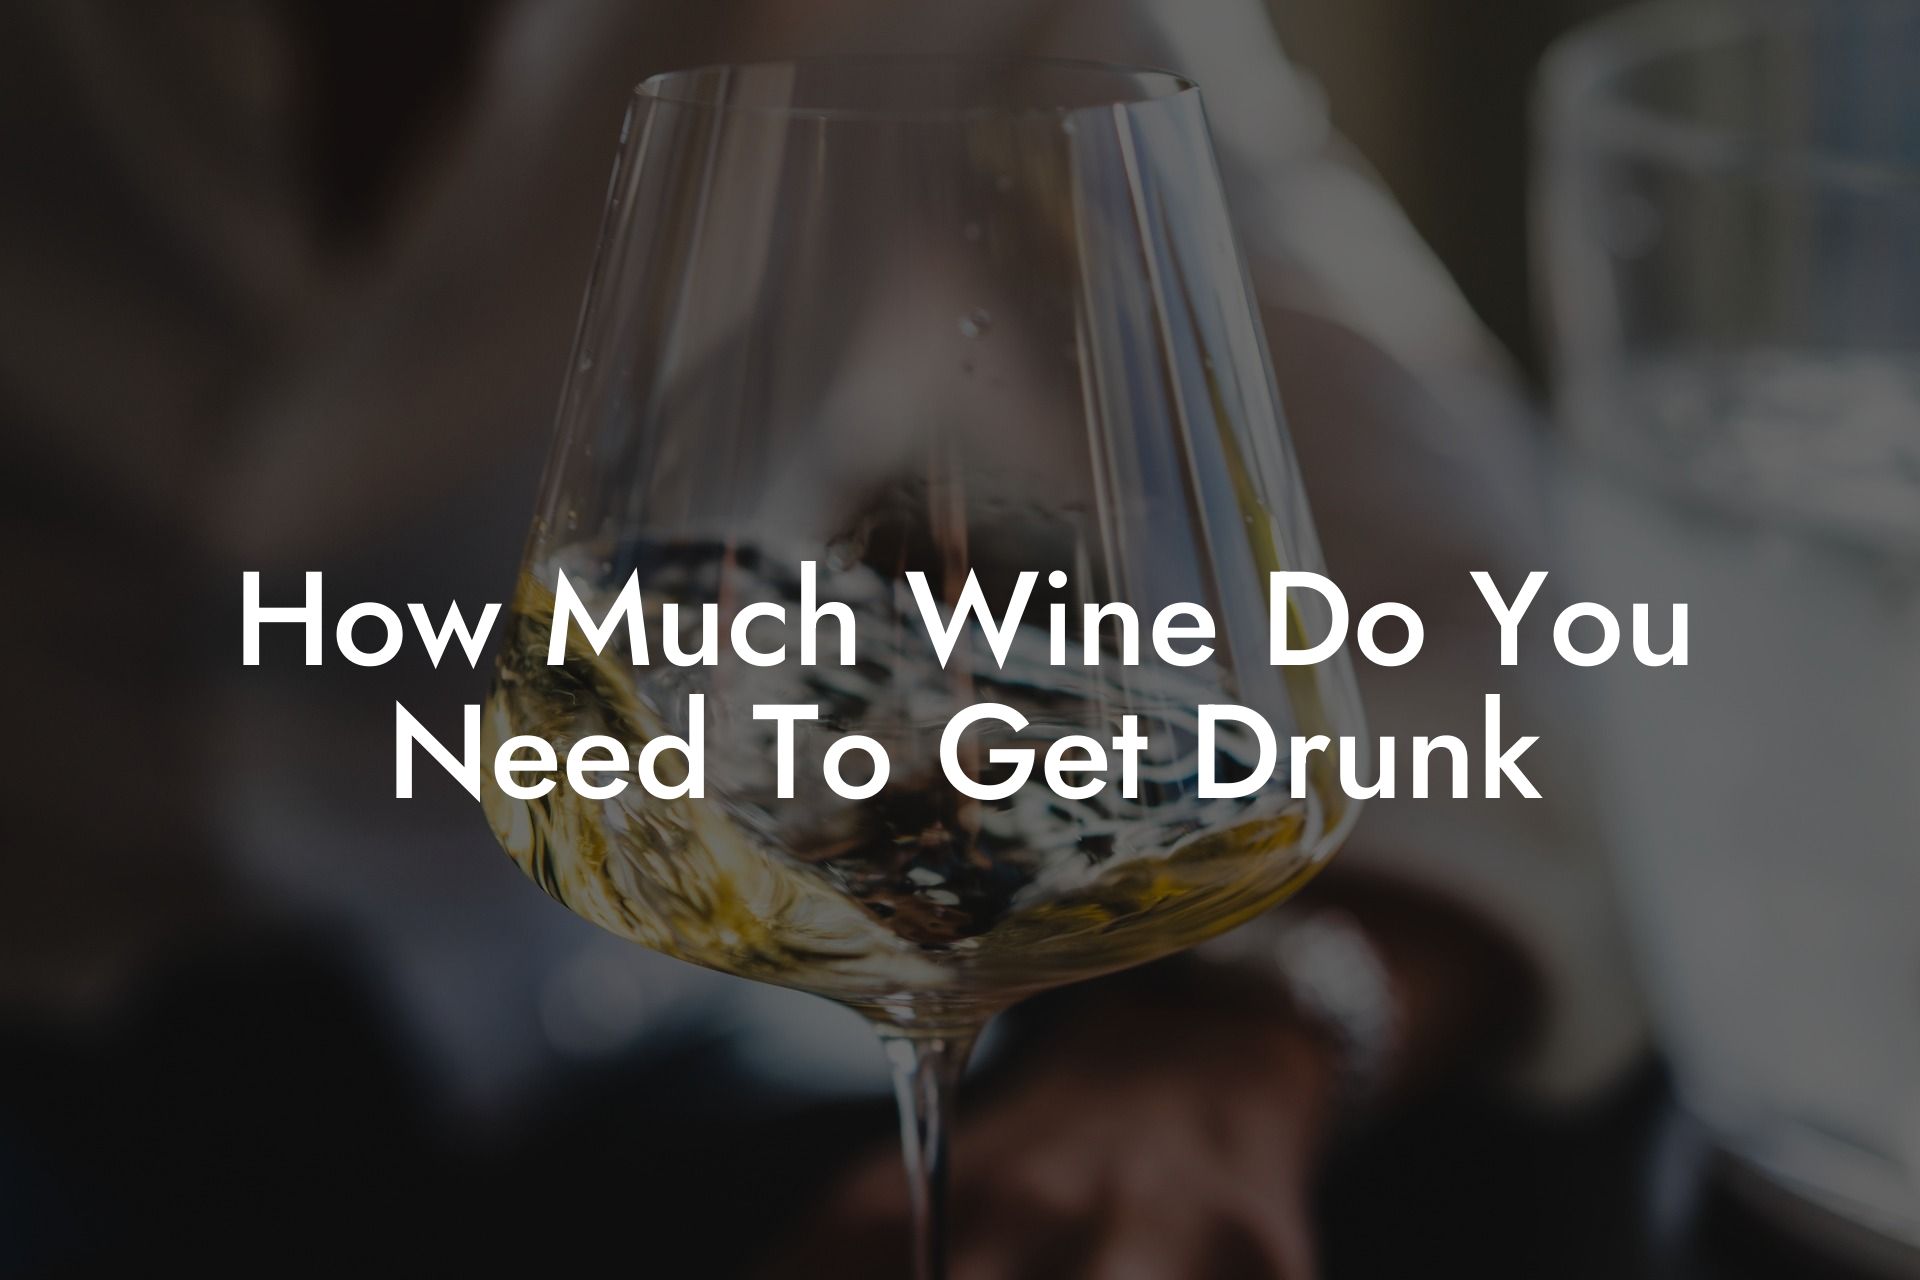 How Much Wine Do You Need To Get Drunk